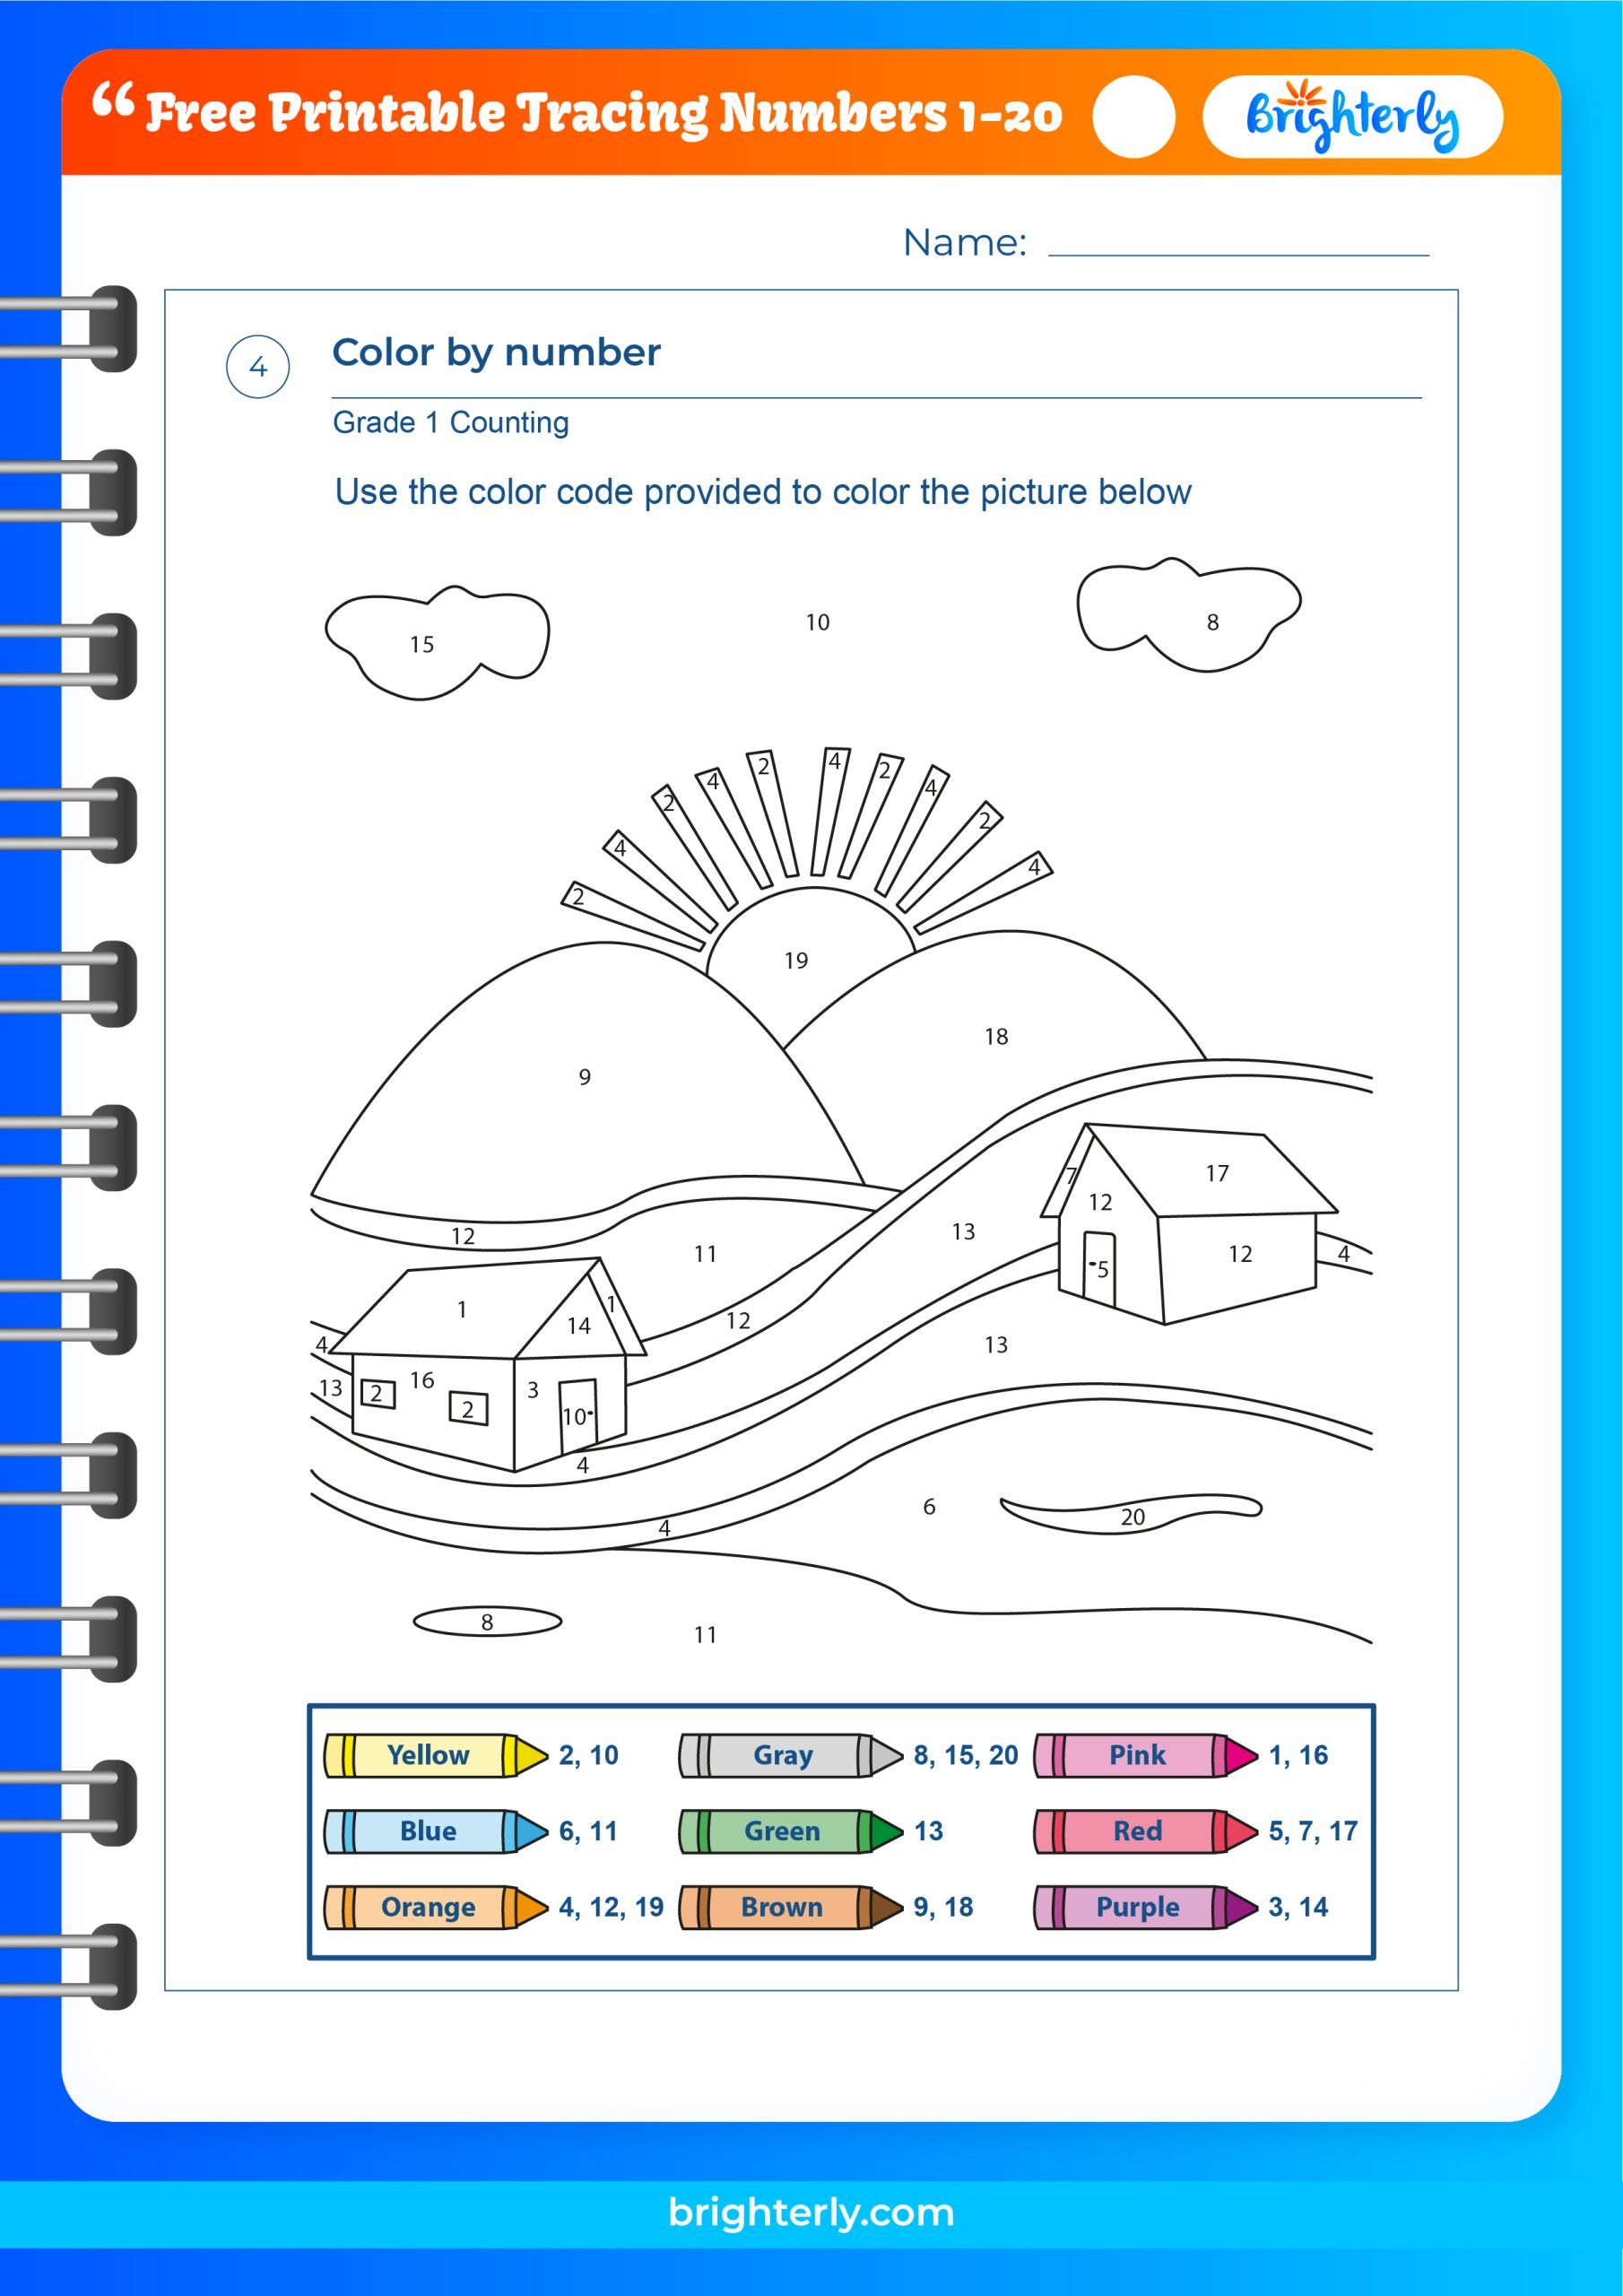 free-printable-number-tracing-worksheets-1-to-20-pdfs-brighterly